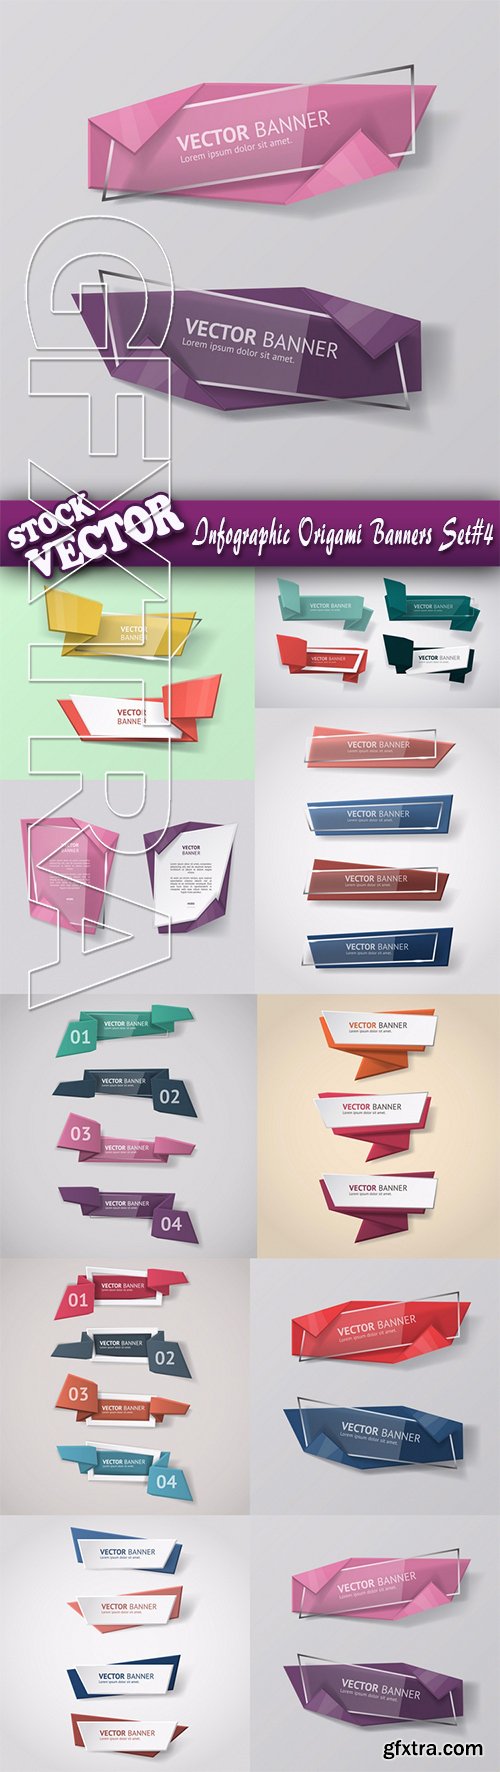 Stock Vector - Infographic Origami Banners Set#4